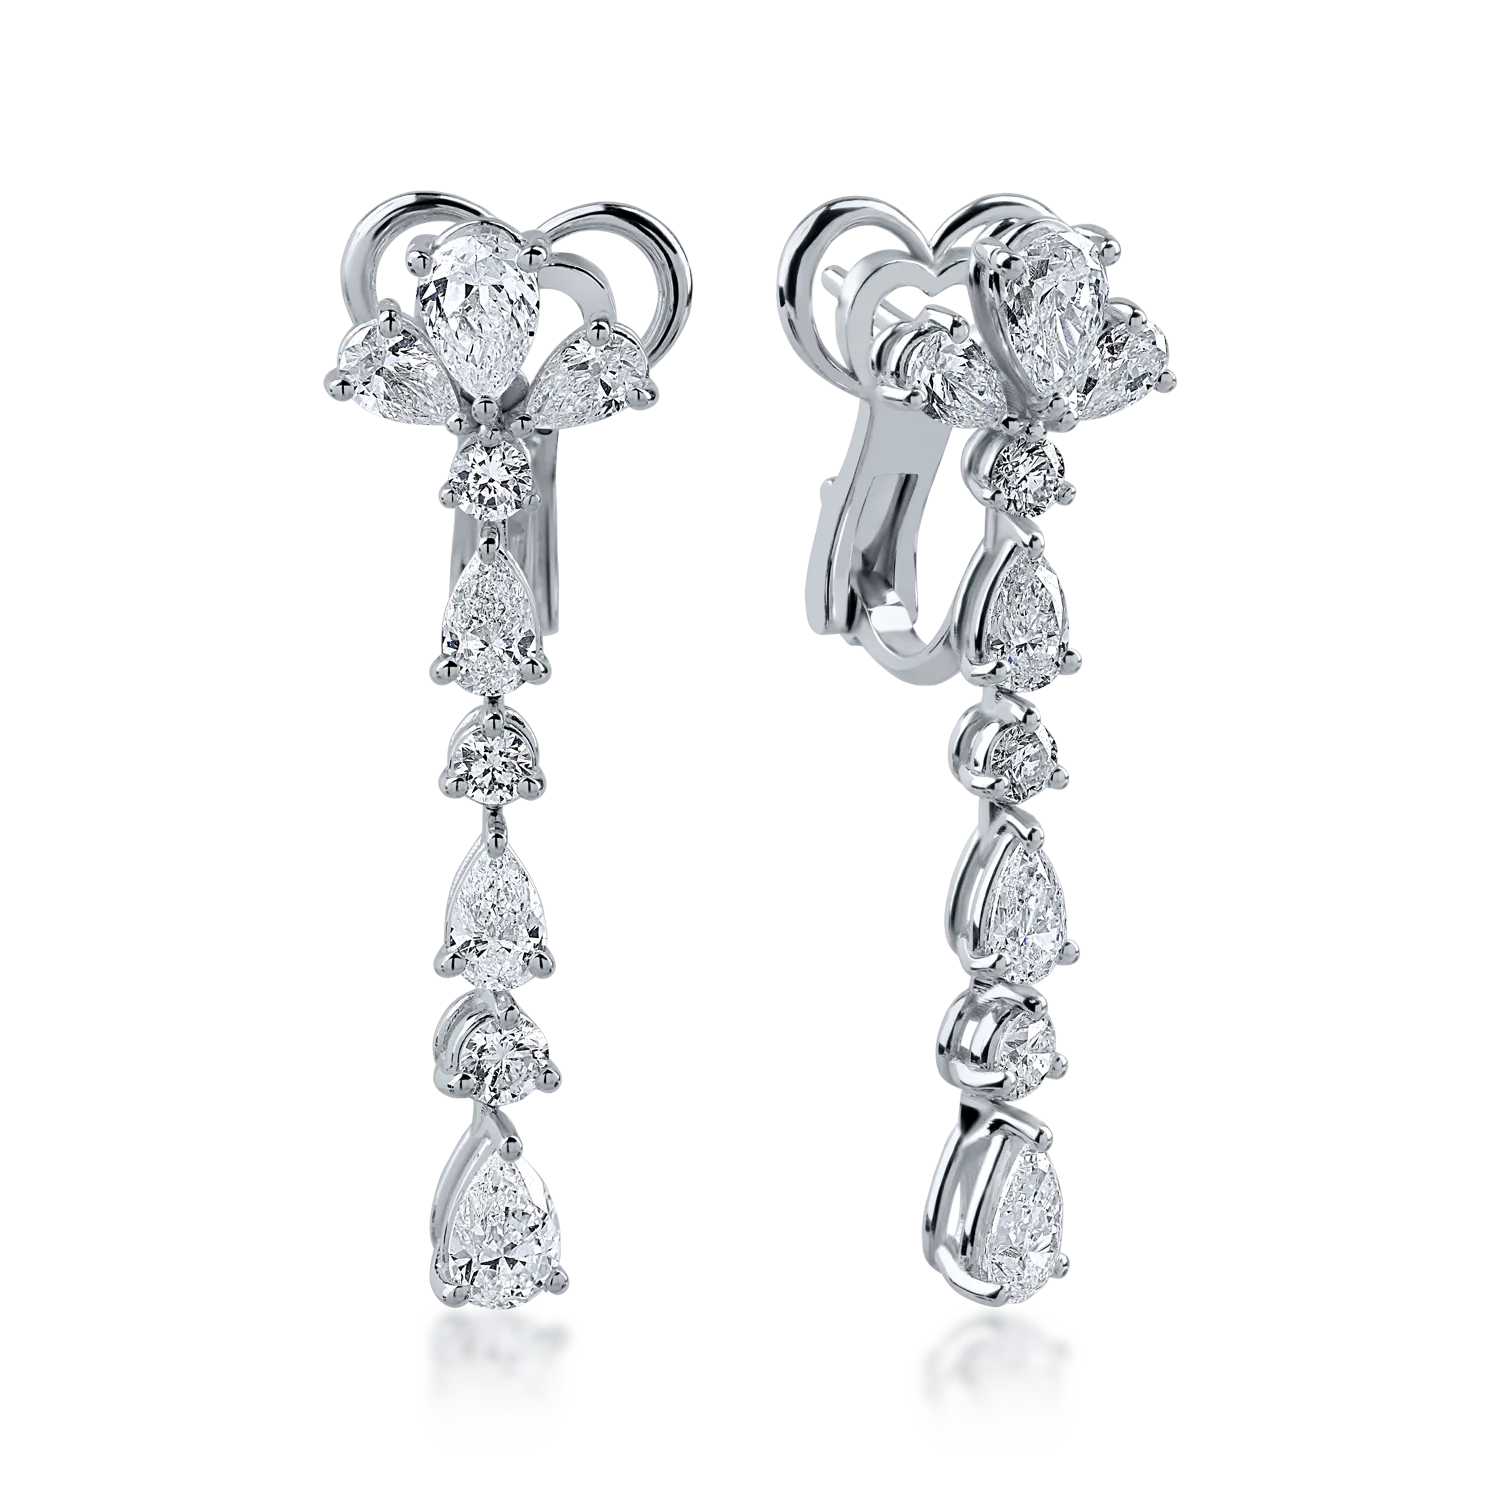 White gold earrings with 3.75ct diamonds